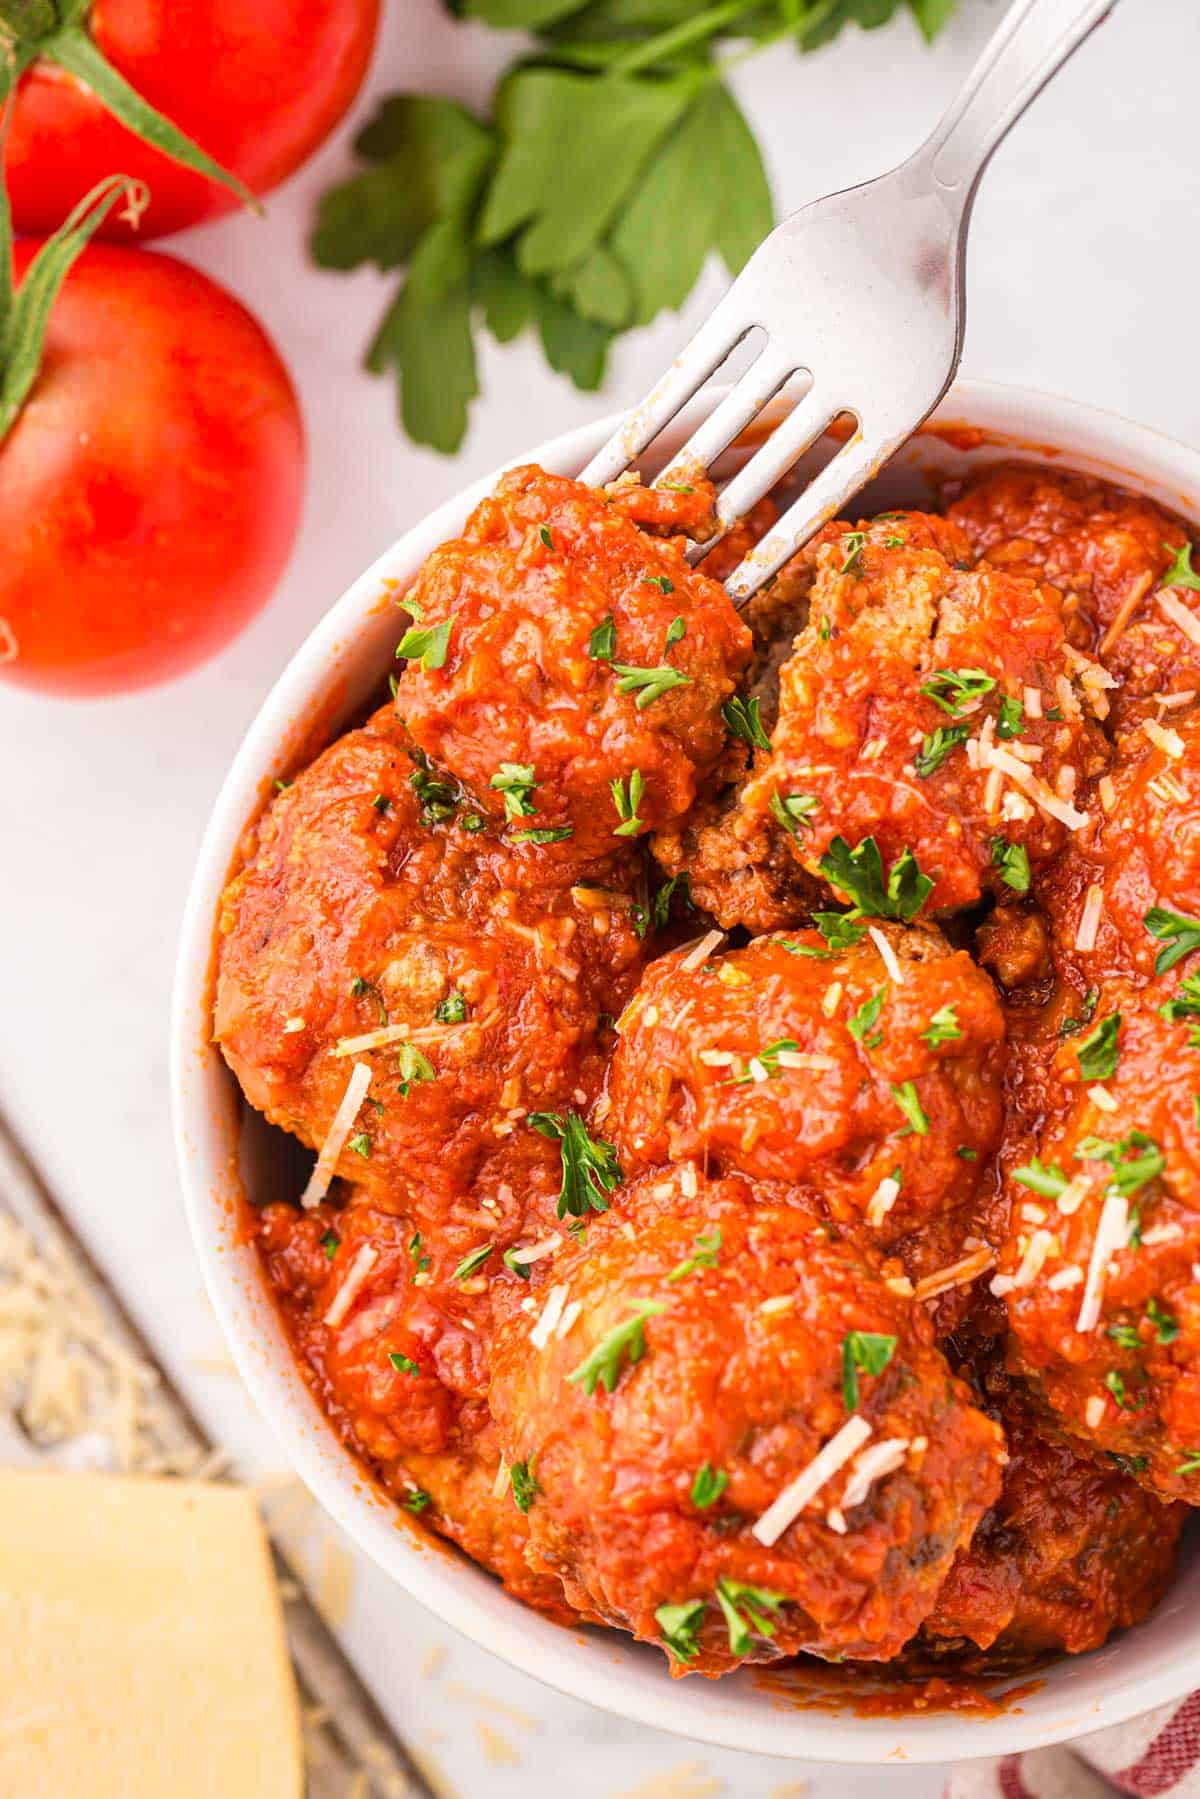 meatballs on a plate with a fork.